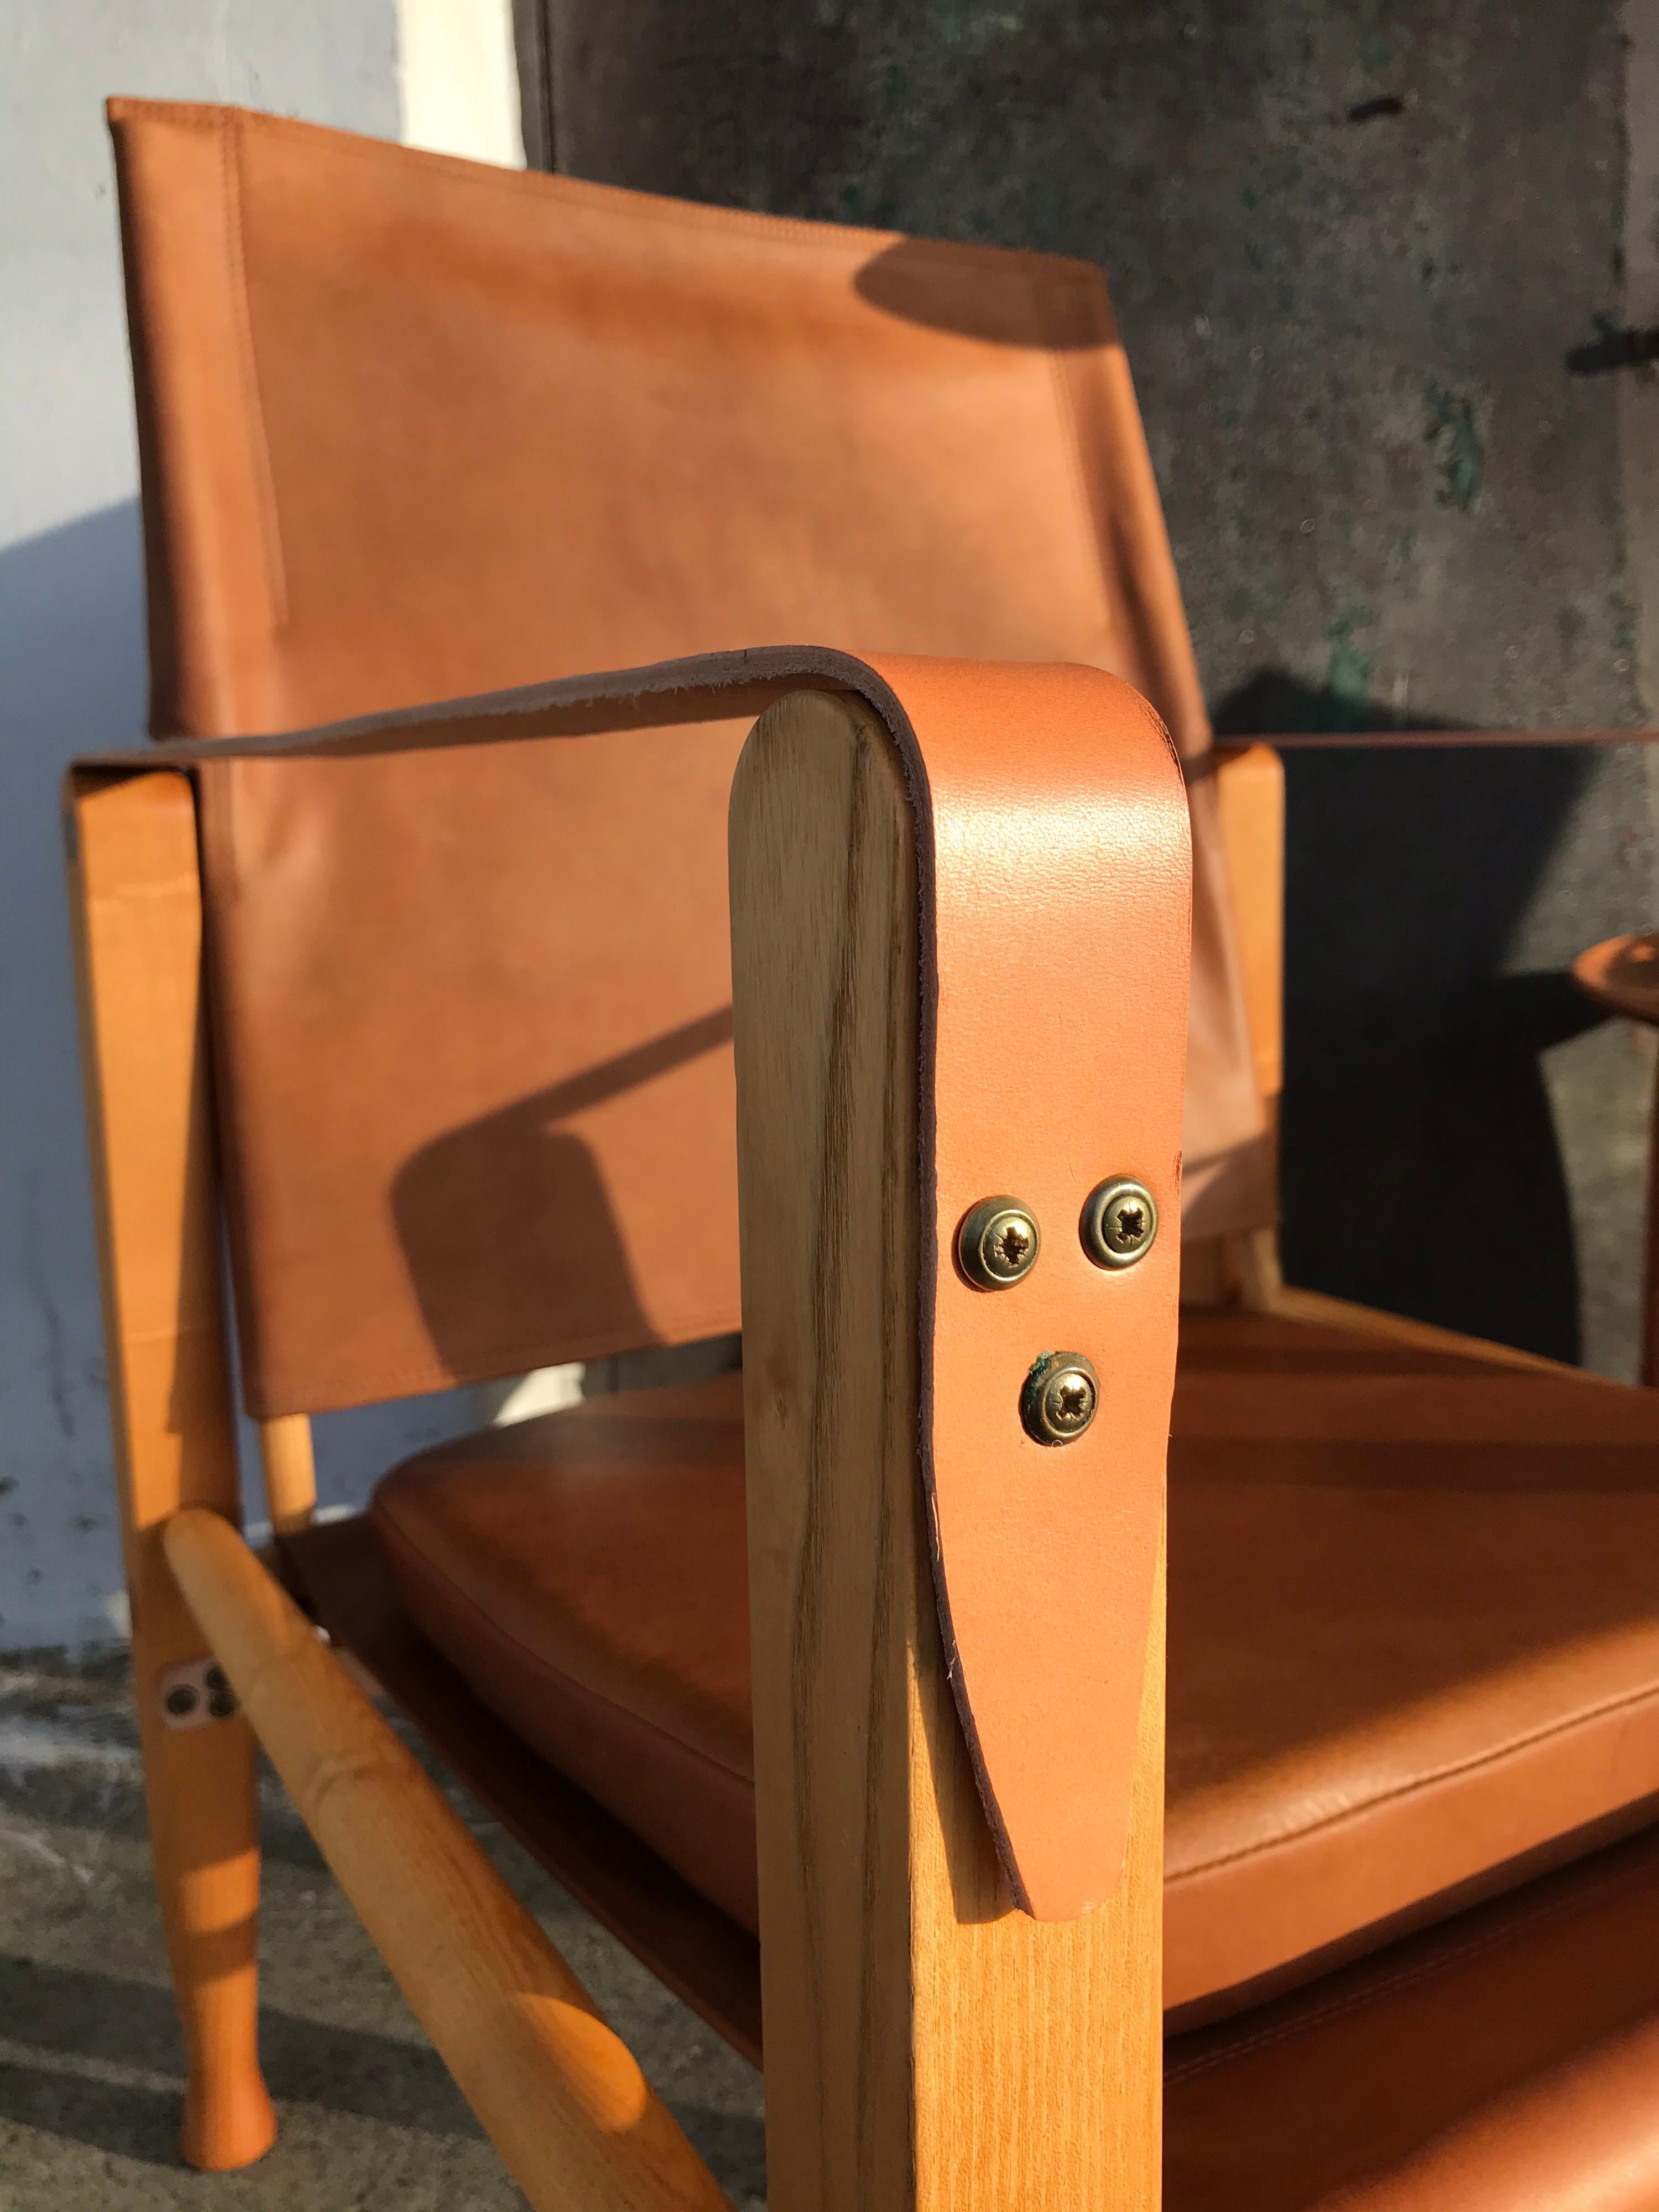 A pair of vintage refurbished safari chairs designed by Kaare Klint for Rud Rasmussen furniture makers.
Kaare Klint designed the safari chairs in 1933.
These iconic chairs are made of ash and have been professionally refurbished with new anilin